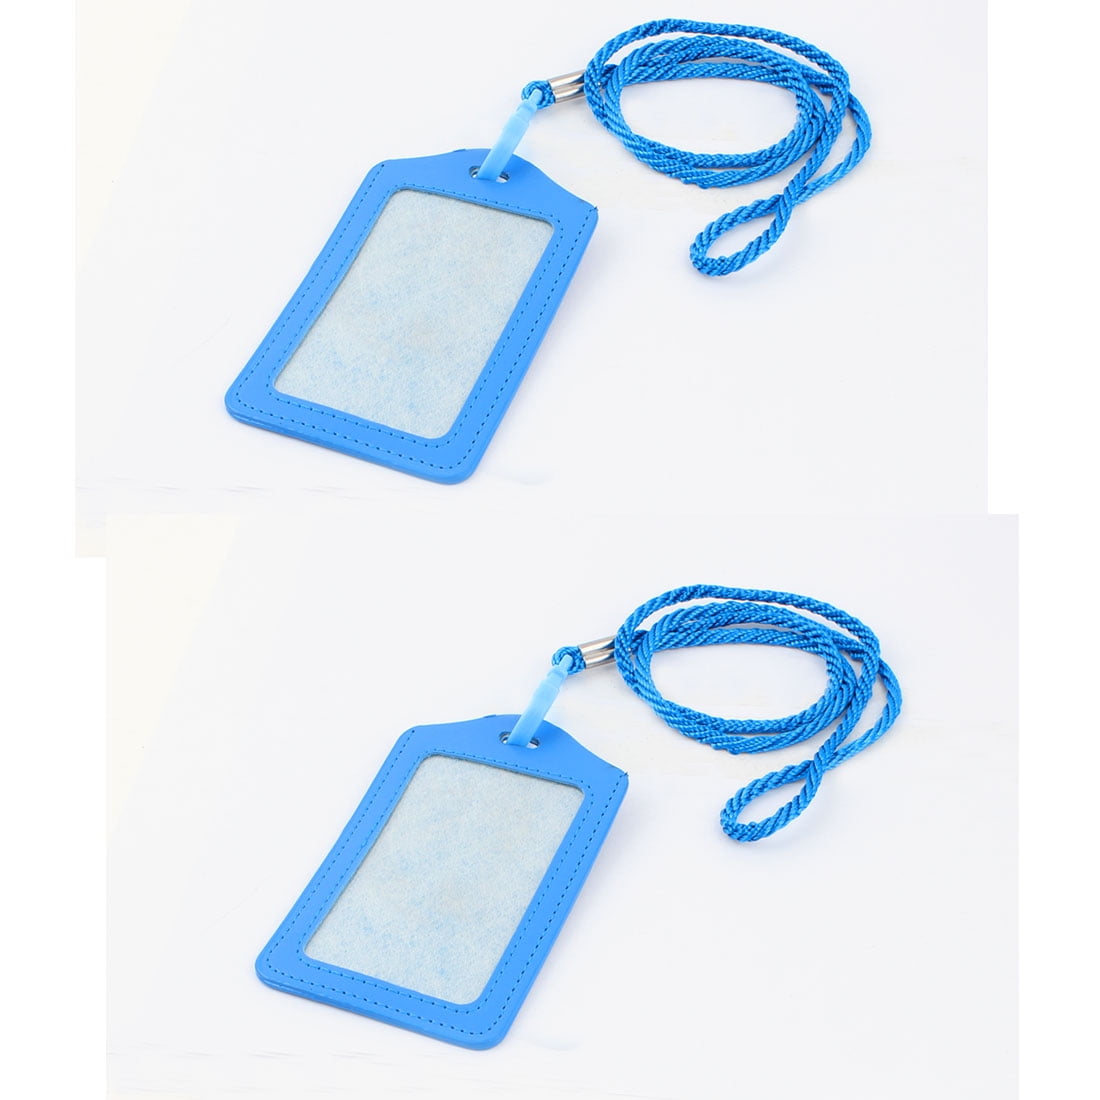 Unique Bargains Plastic ID Card Holder Lanyard Name School Office Bank Students Stationery Blue W Neck Strap